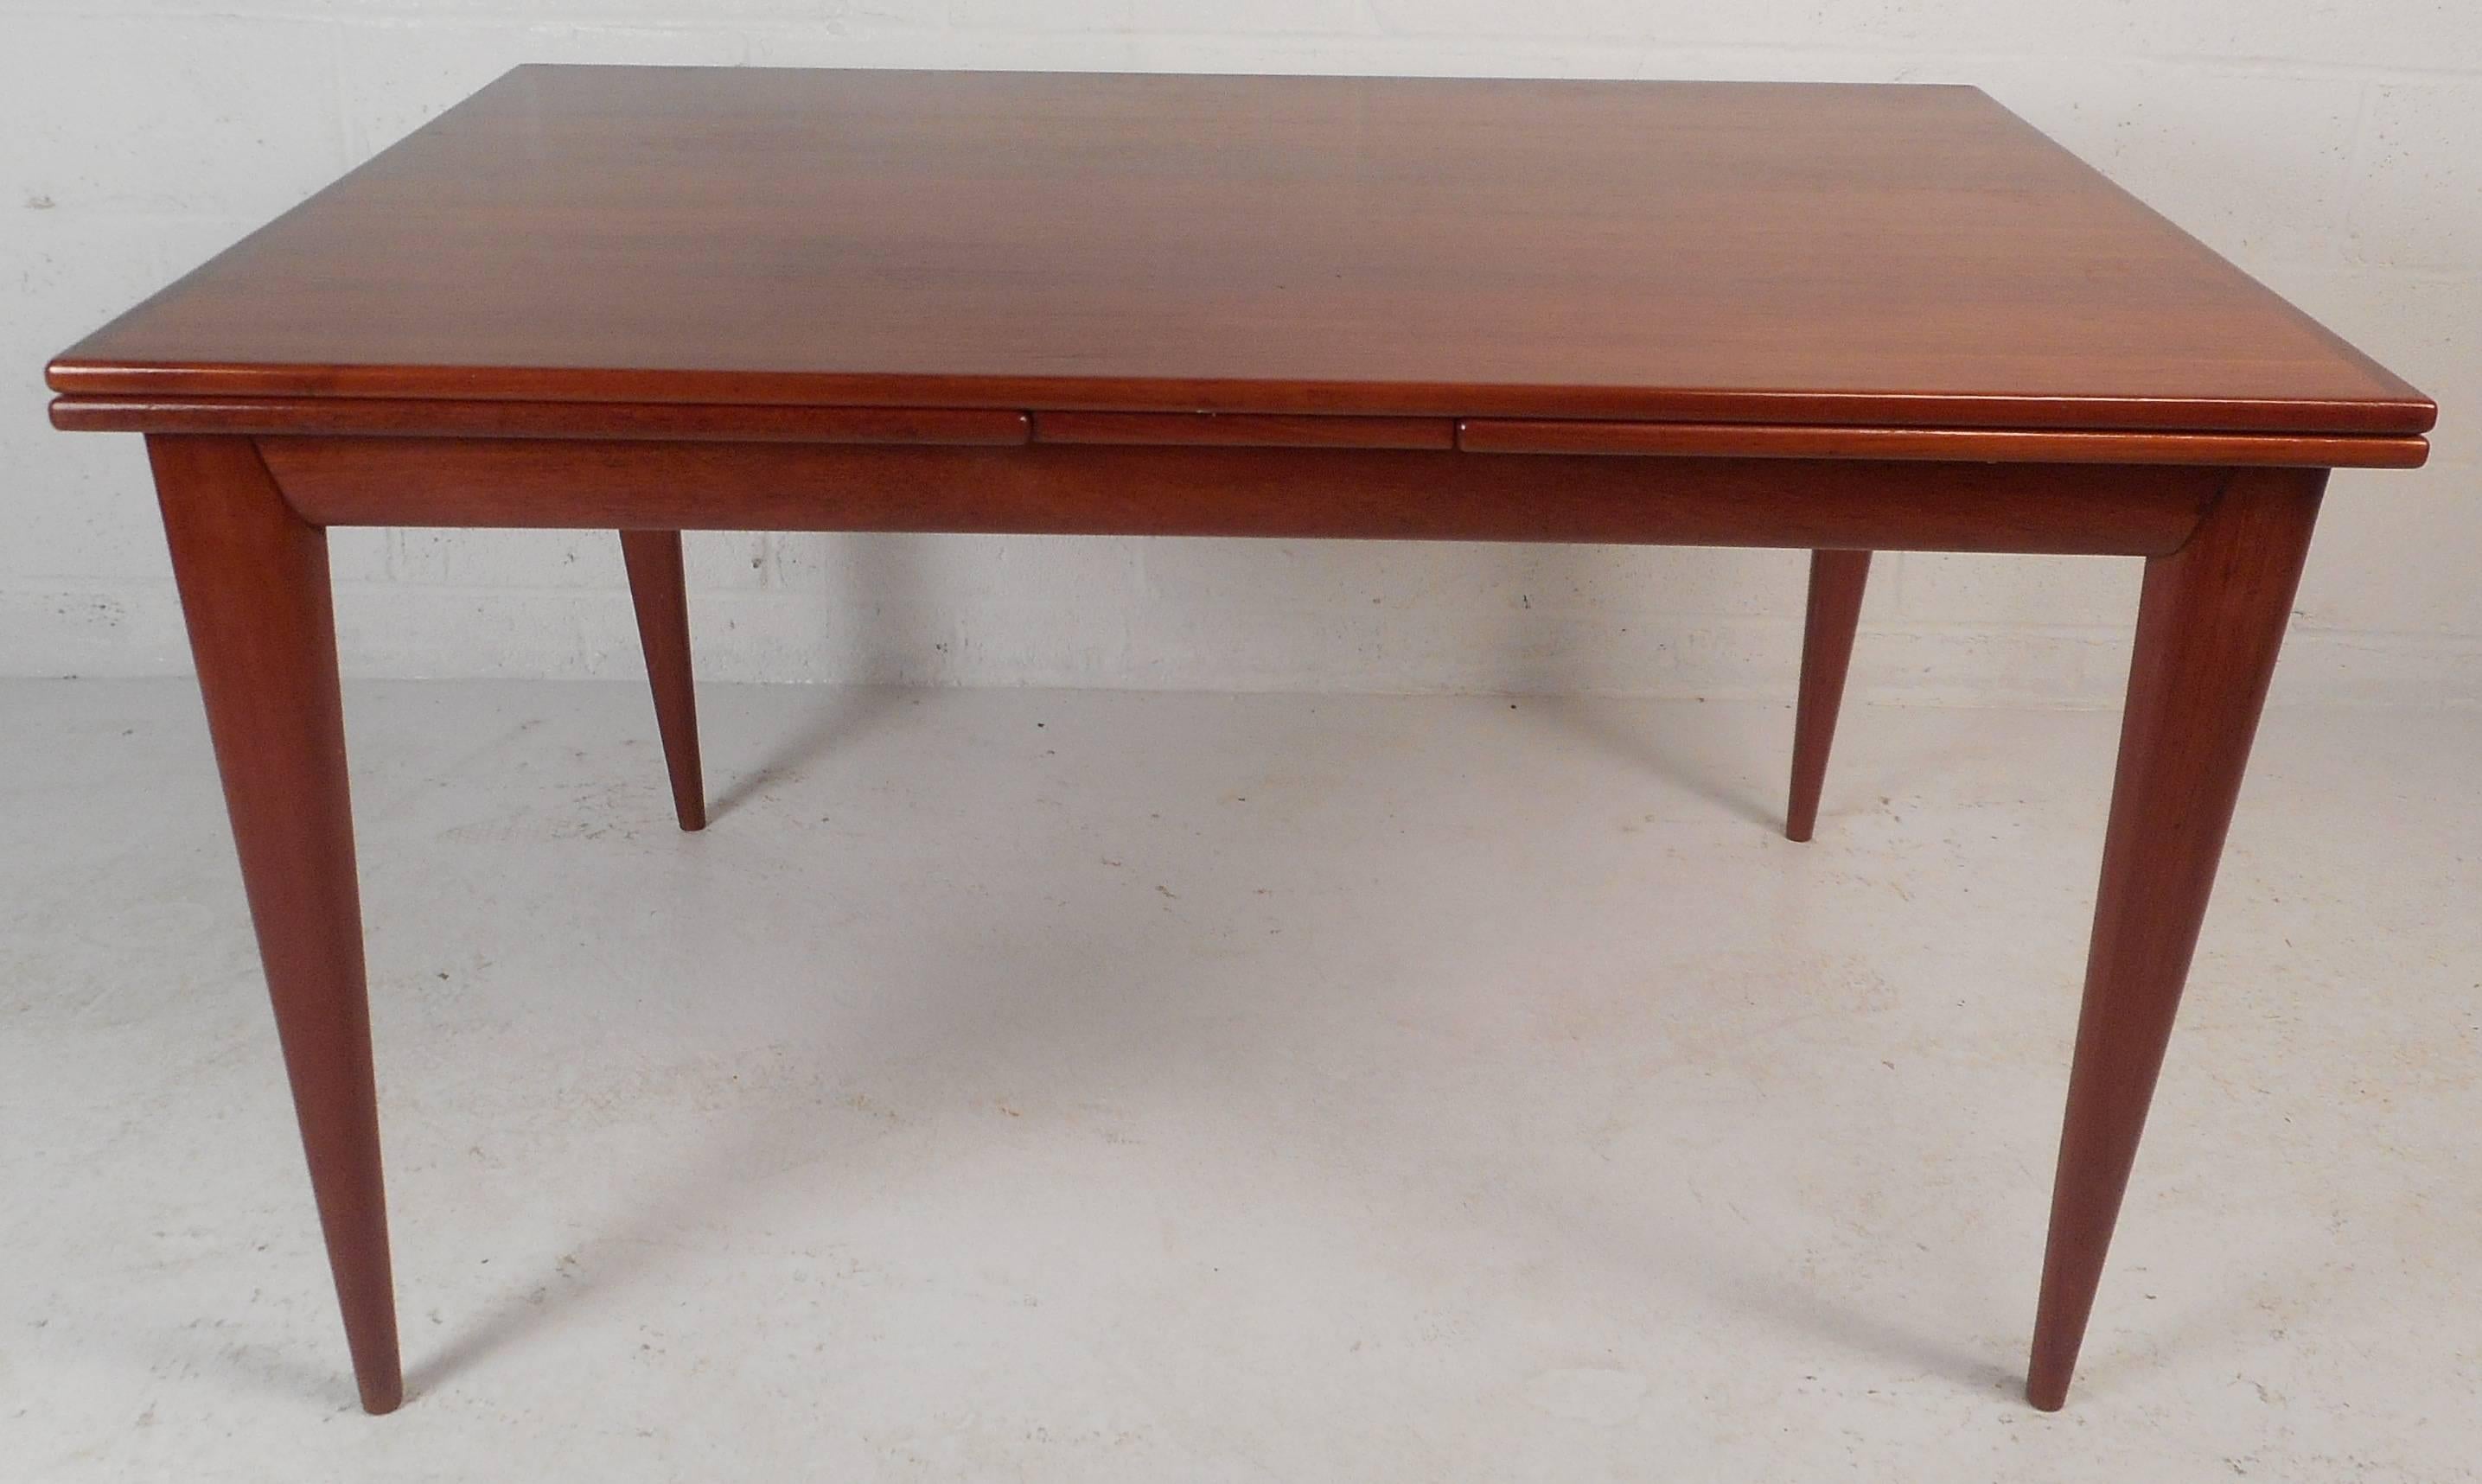 This elegant vintage modern dining table features two hidden leaves that extend the width all the way to 93.25 inches. Versatile design with unique angled legs and beautiful teak wood grain. This Mid-Century piece offers plenty of room for guests